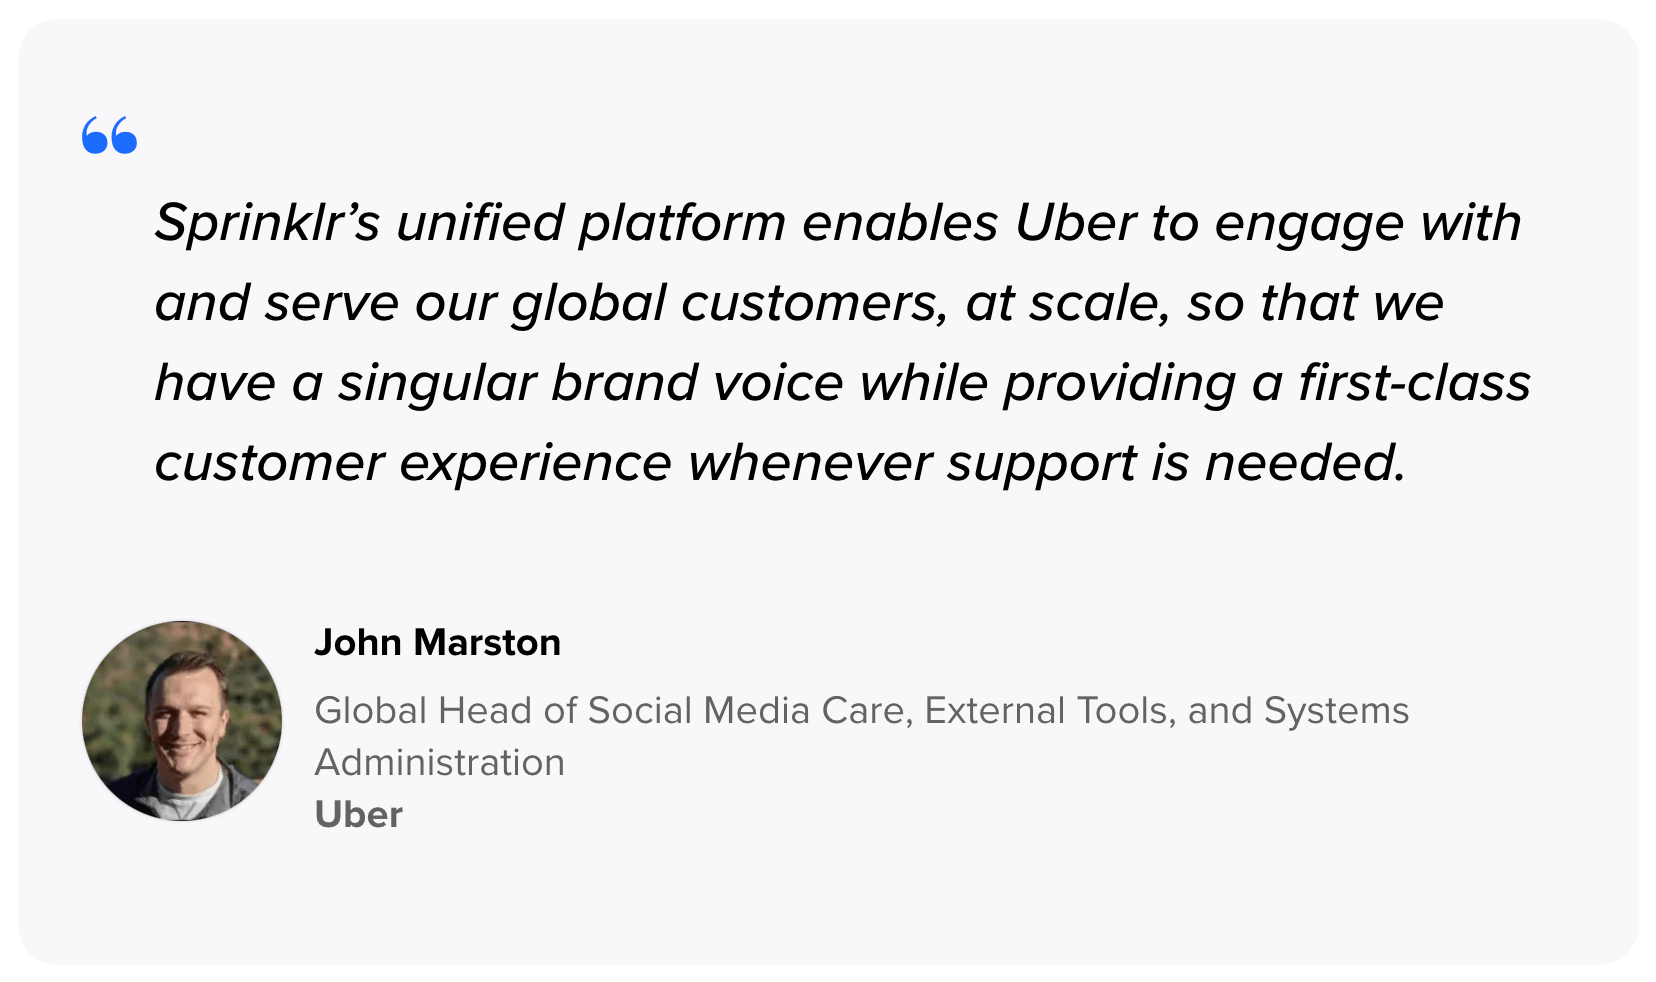 Uber testifies for stellar digital customer support with the help of Sprinklr Service